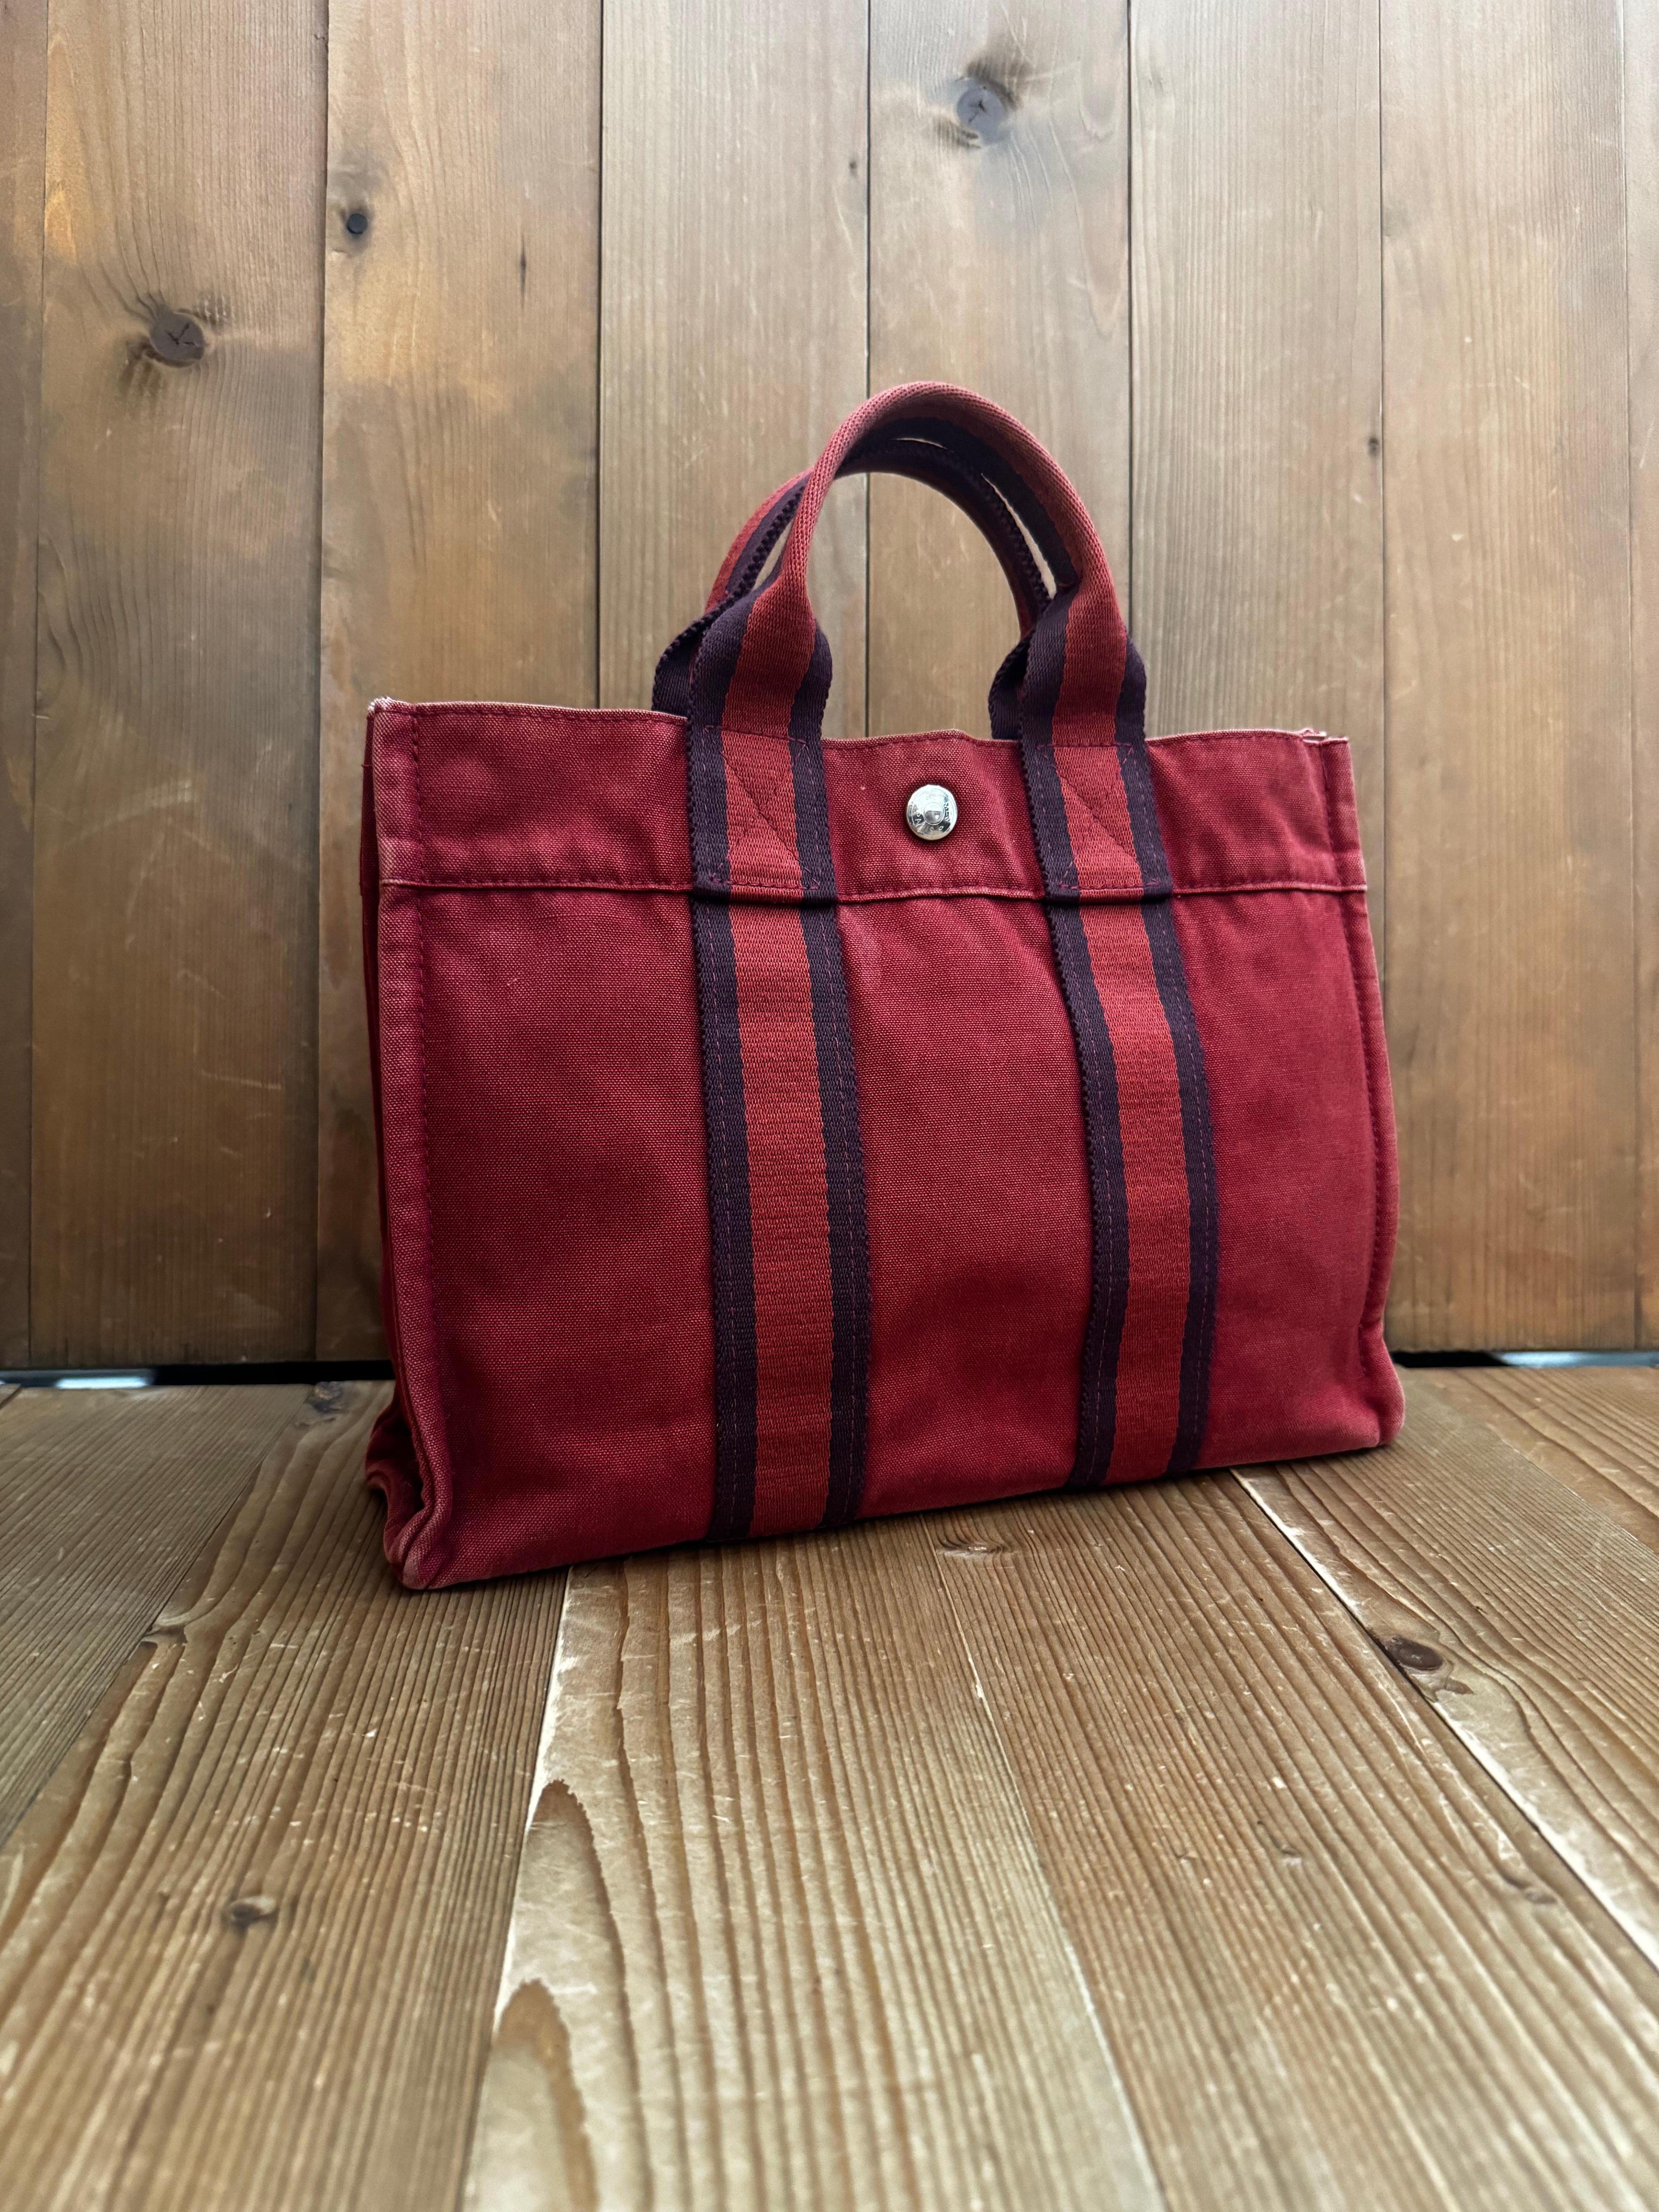 This vintage HERMES Fourre Tout PM tote is crafted of cotton in orange featuring sturdy handles of stripe canvas. Wide top with snap closure opens to an interior of the same cotton fabric featuring a zippered pocket. This is a sophisticated tote